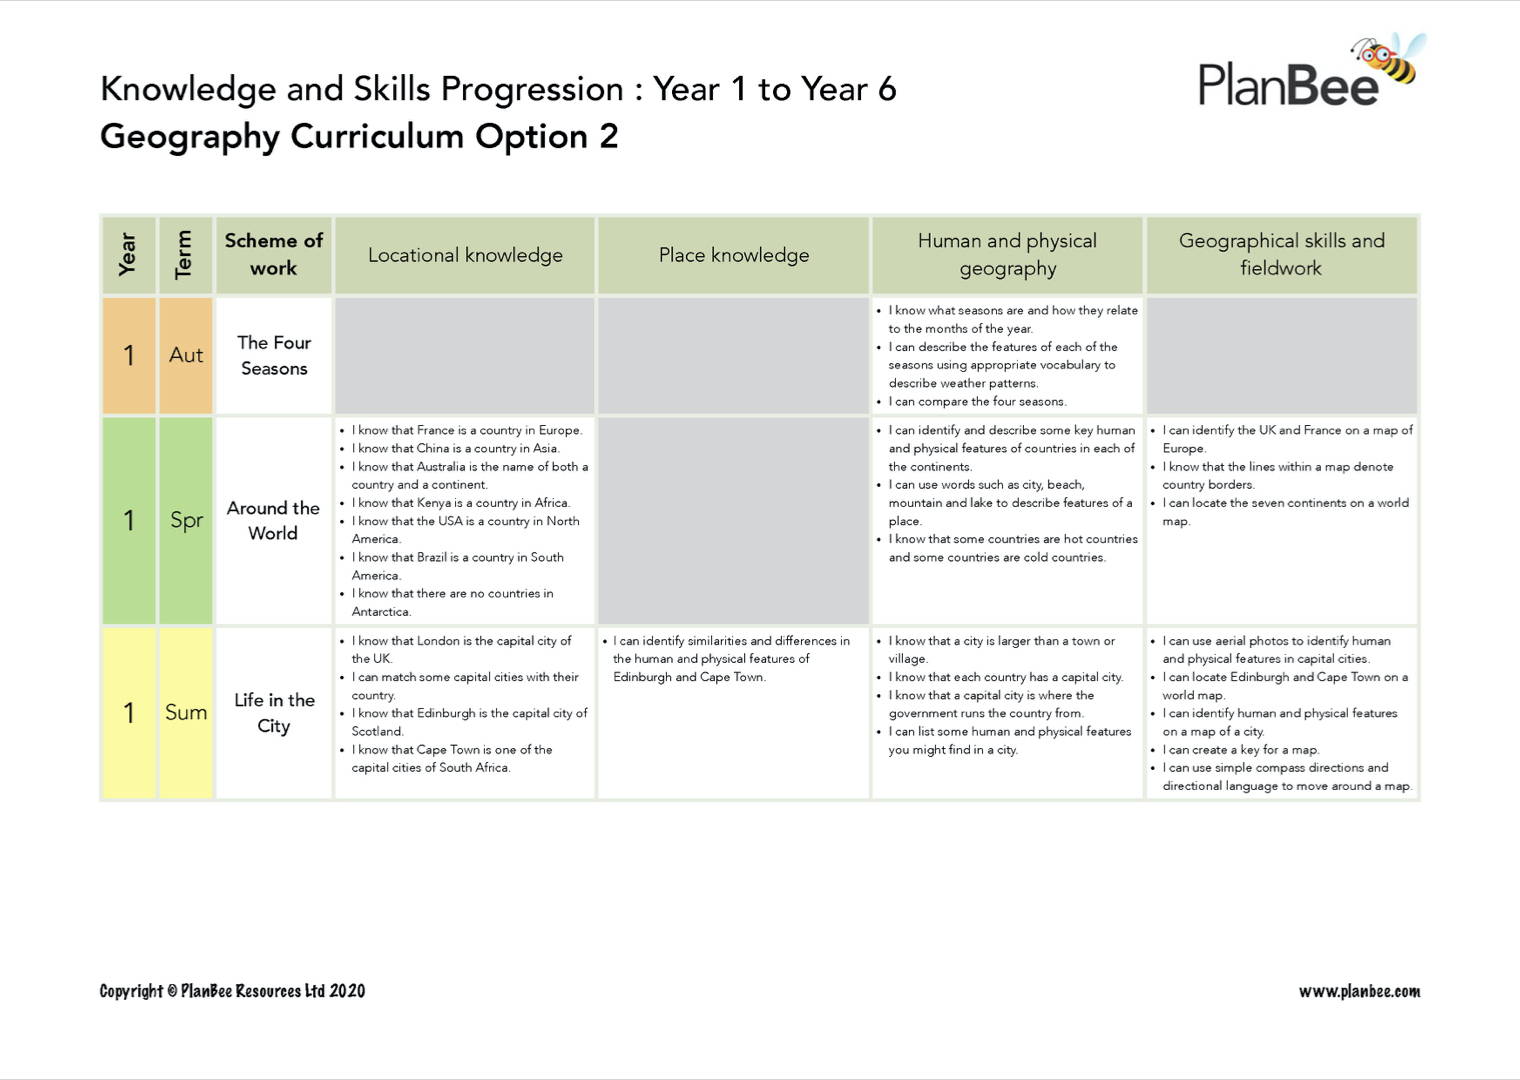 Knowledge and Skills Geography 2 Curriculum